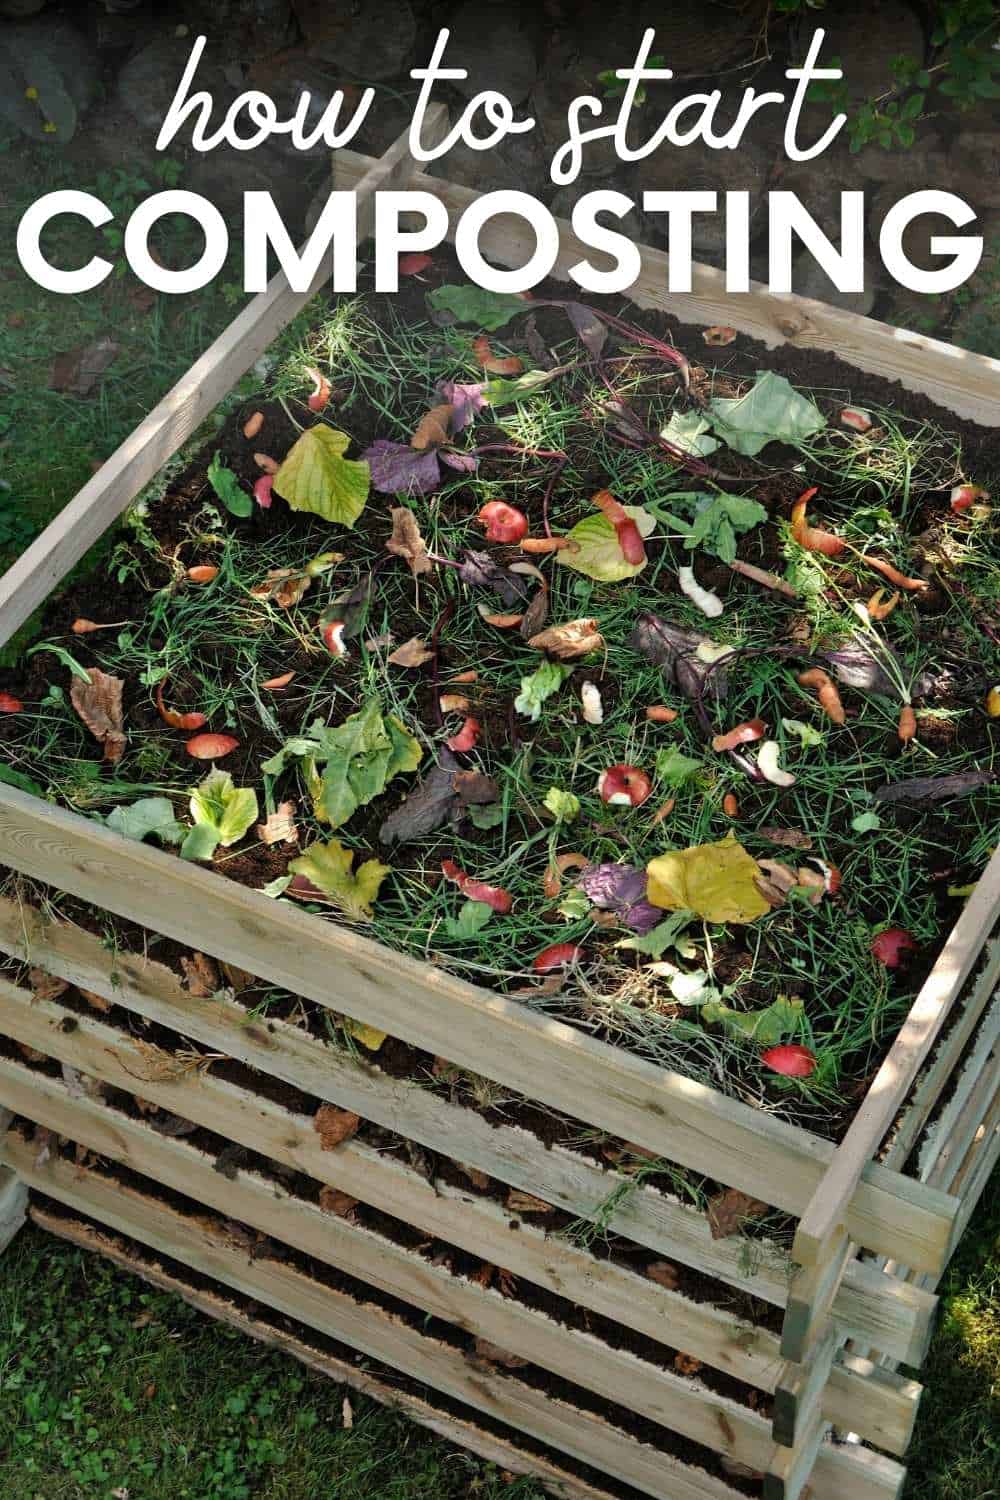 I Want to Compost But…